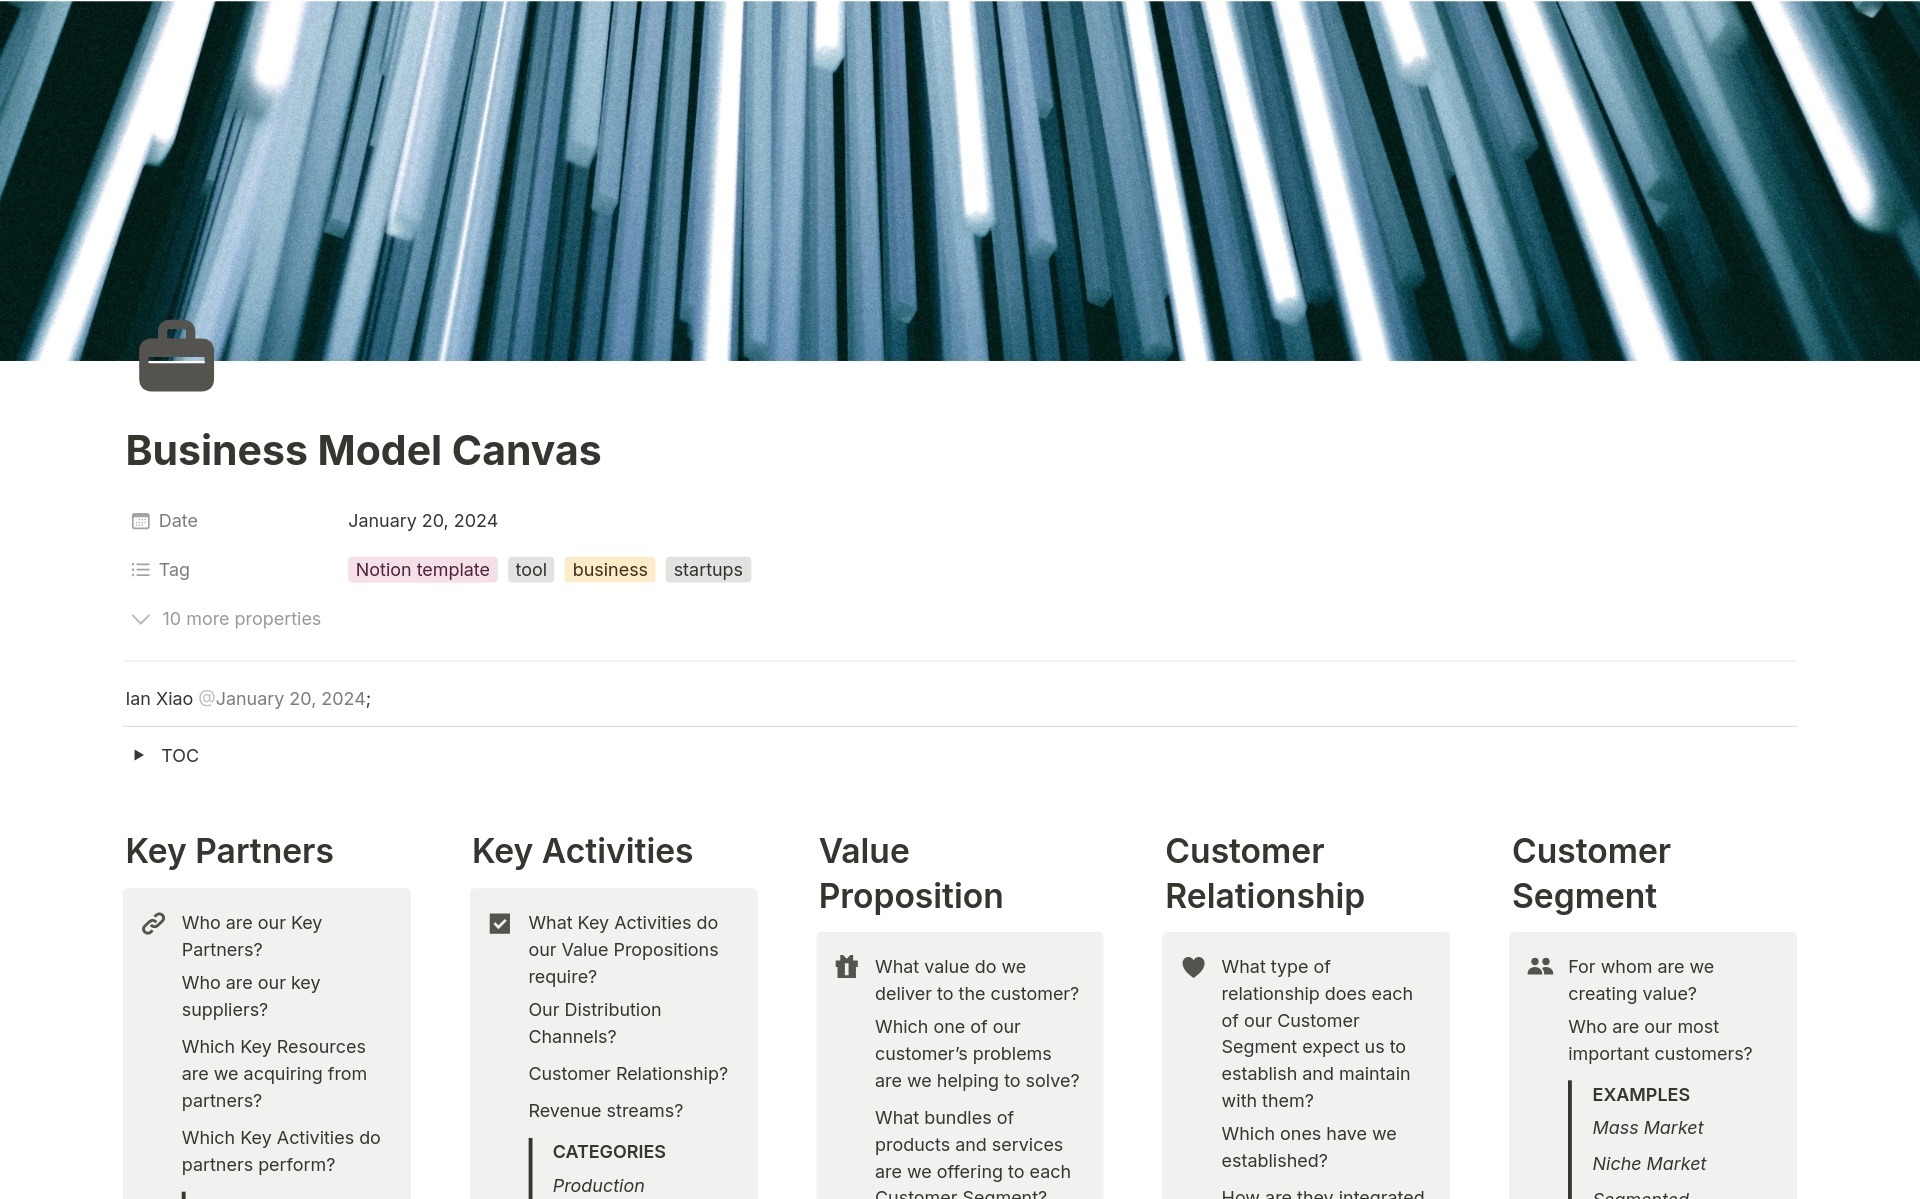 Business Model Canvas implemented with Notion that includes Key Partners, Key Activities, Key Resources, Value Proposition, Customer Relationship, Channels, Customer Segment, Cost Structure, Revenue Streams